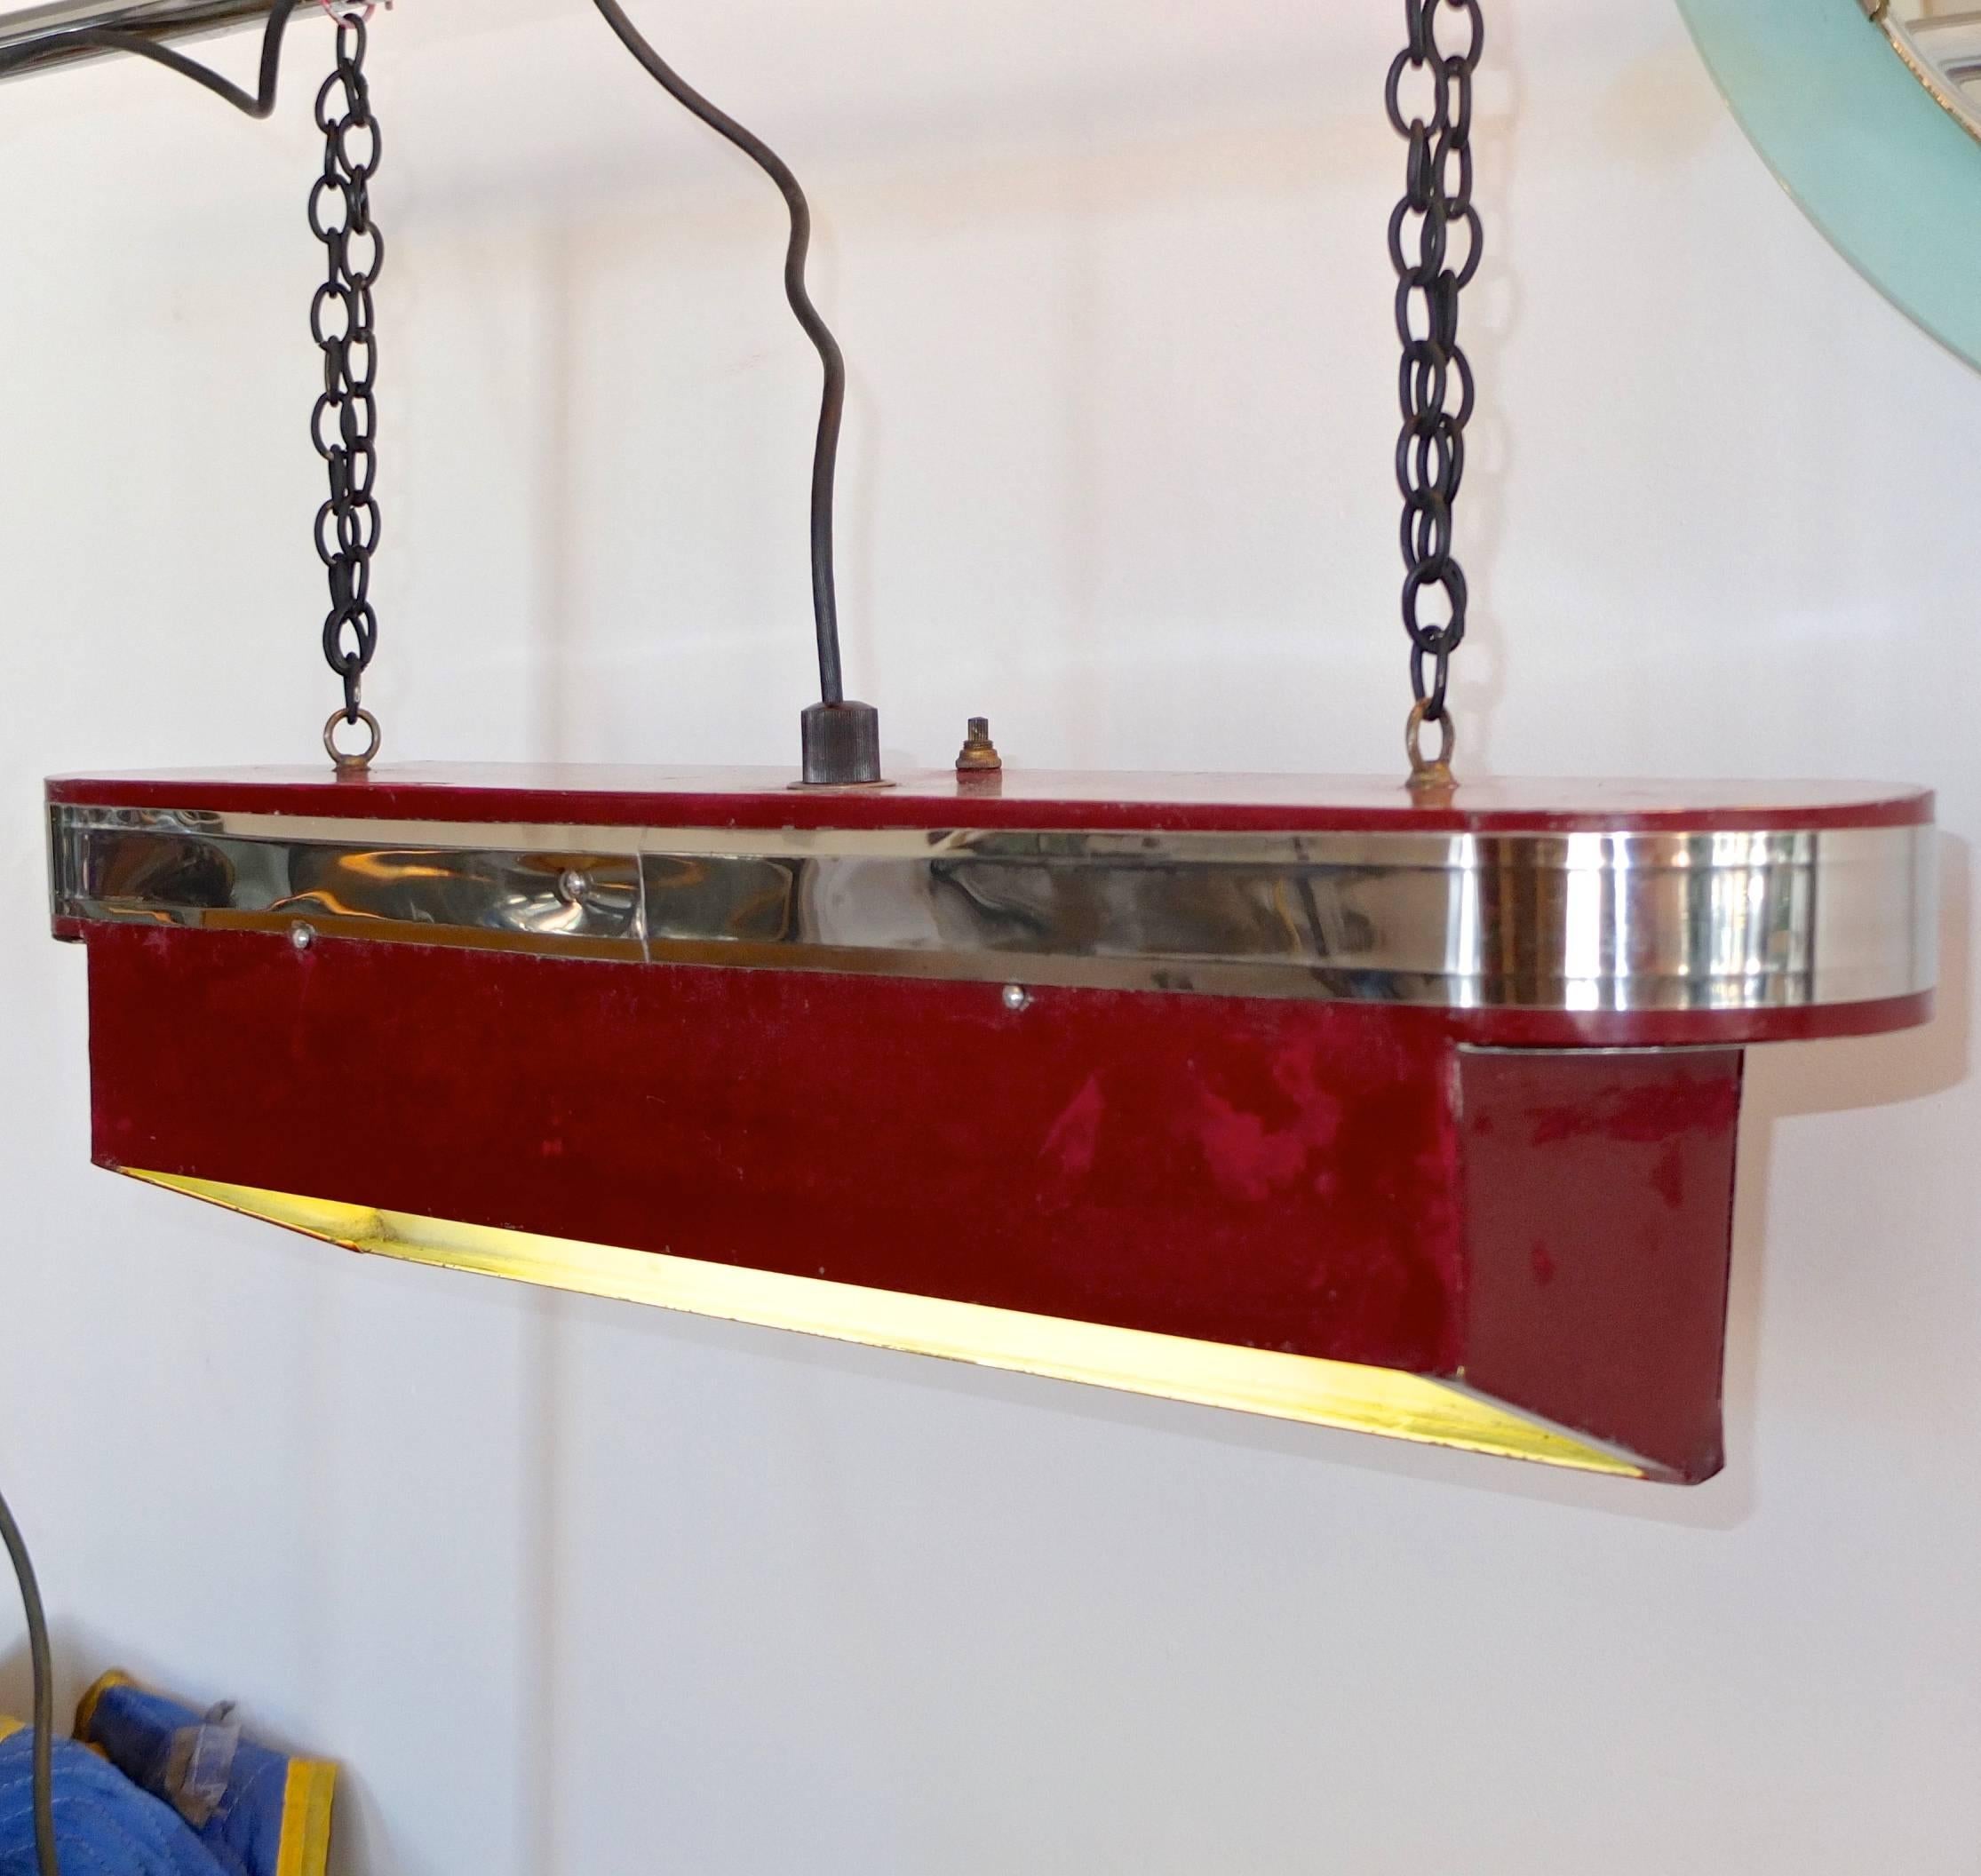 Streamline Art Deco horizontal hanging light with 17 inch fluorescent tube light. Stylish machine age oblong top reminiscent of a transatlantic ocean liner with chrome banding above wedge form steel box painted burgundy red. On or off switch on top